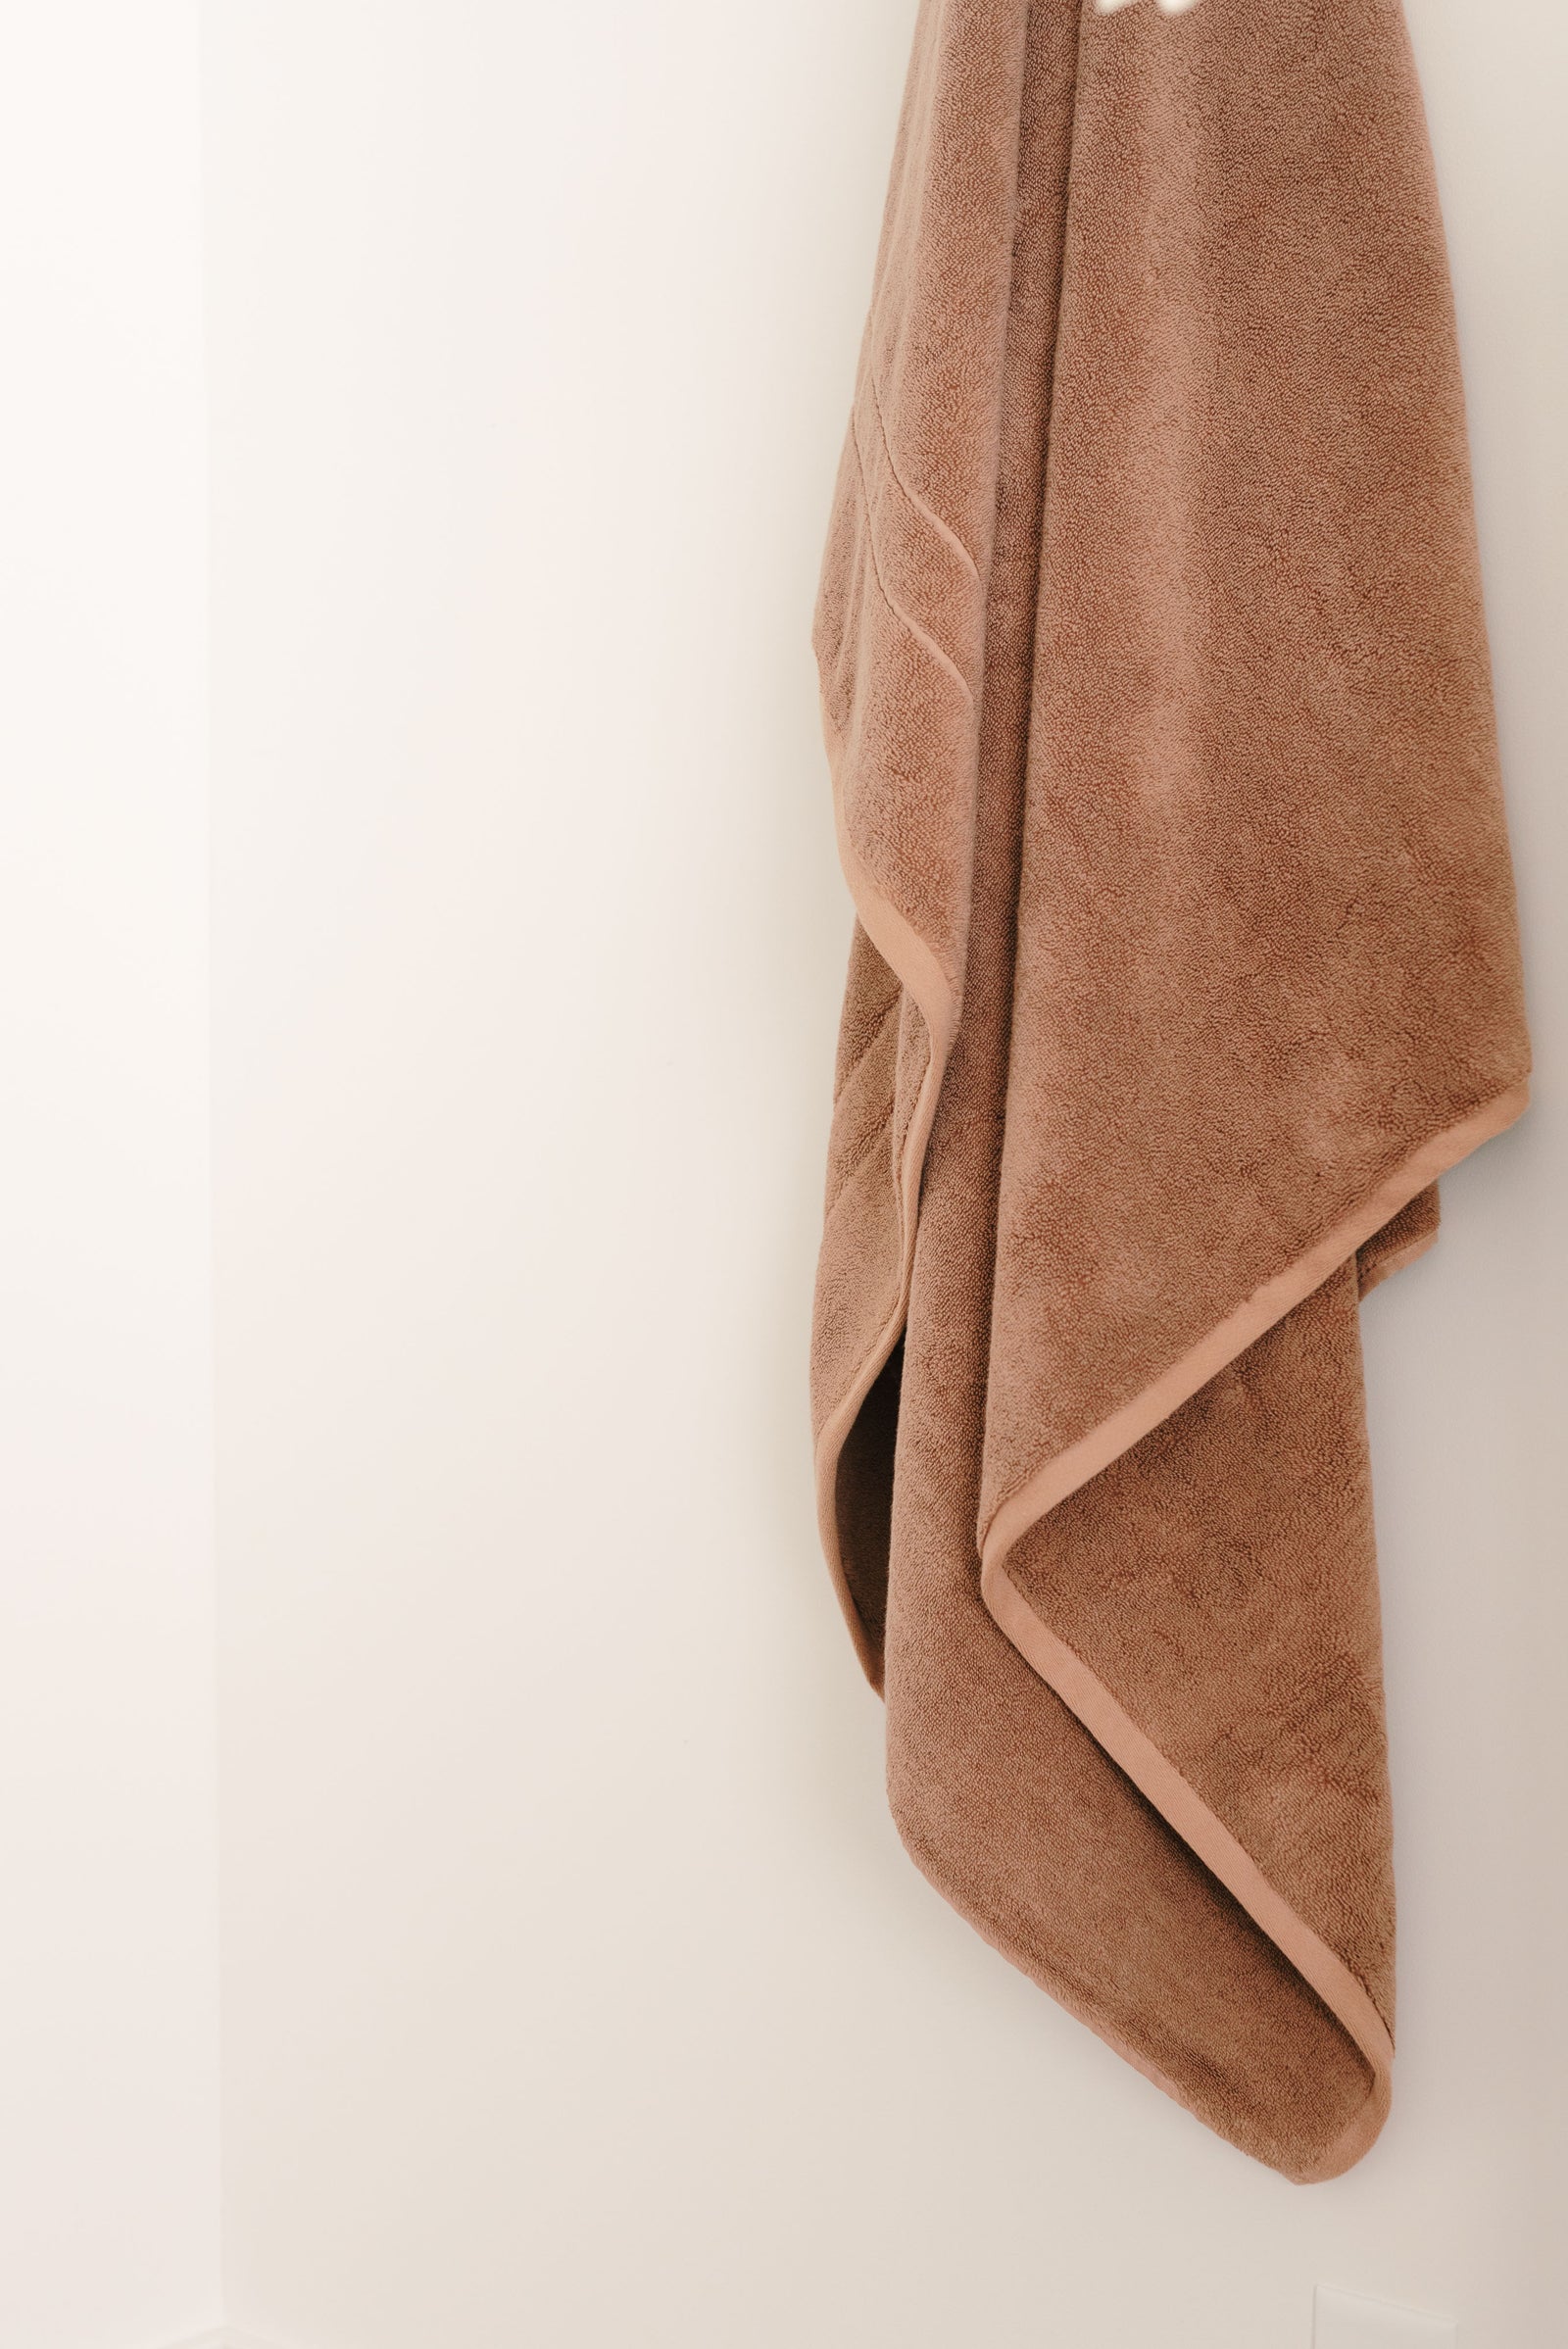 Premium Plush Bath Towel in the color Clay. Photo of Clay Premium Plush Bath Towel taken in a white bathroom hanging from towel hook 